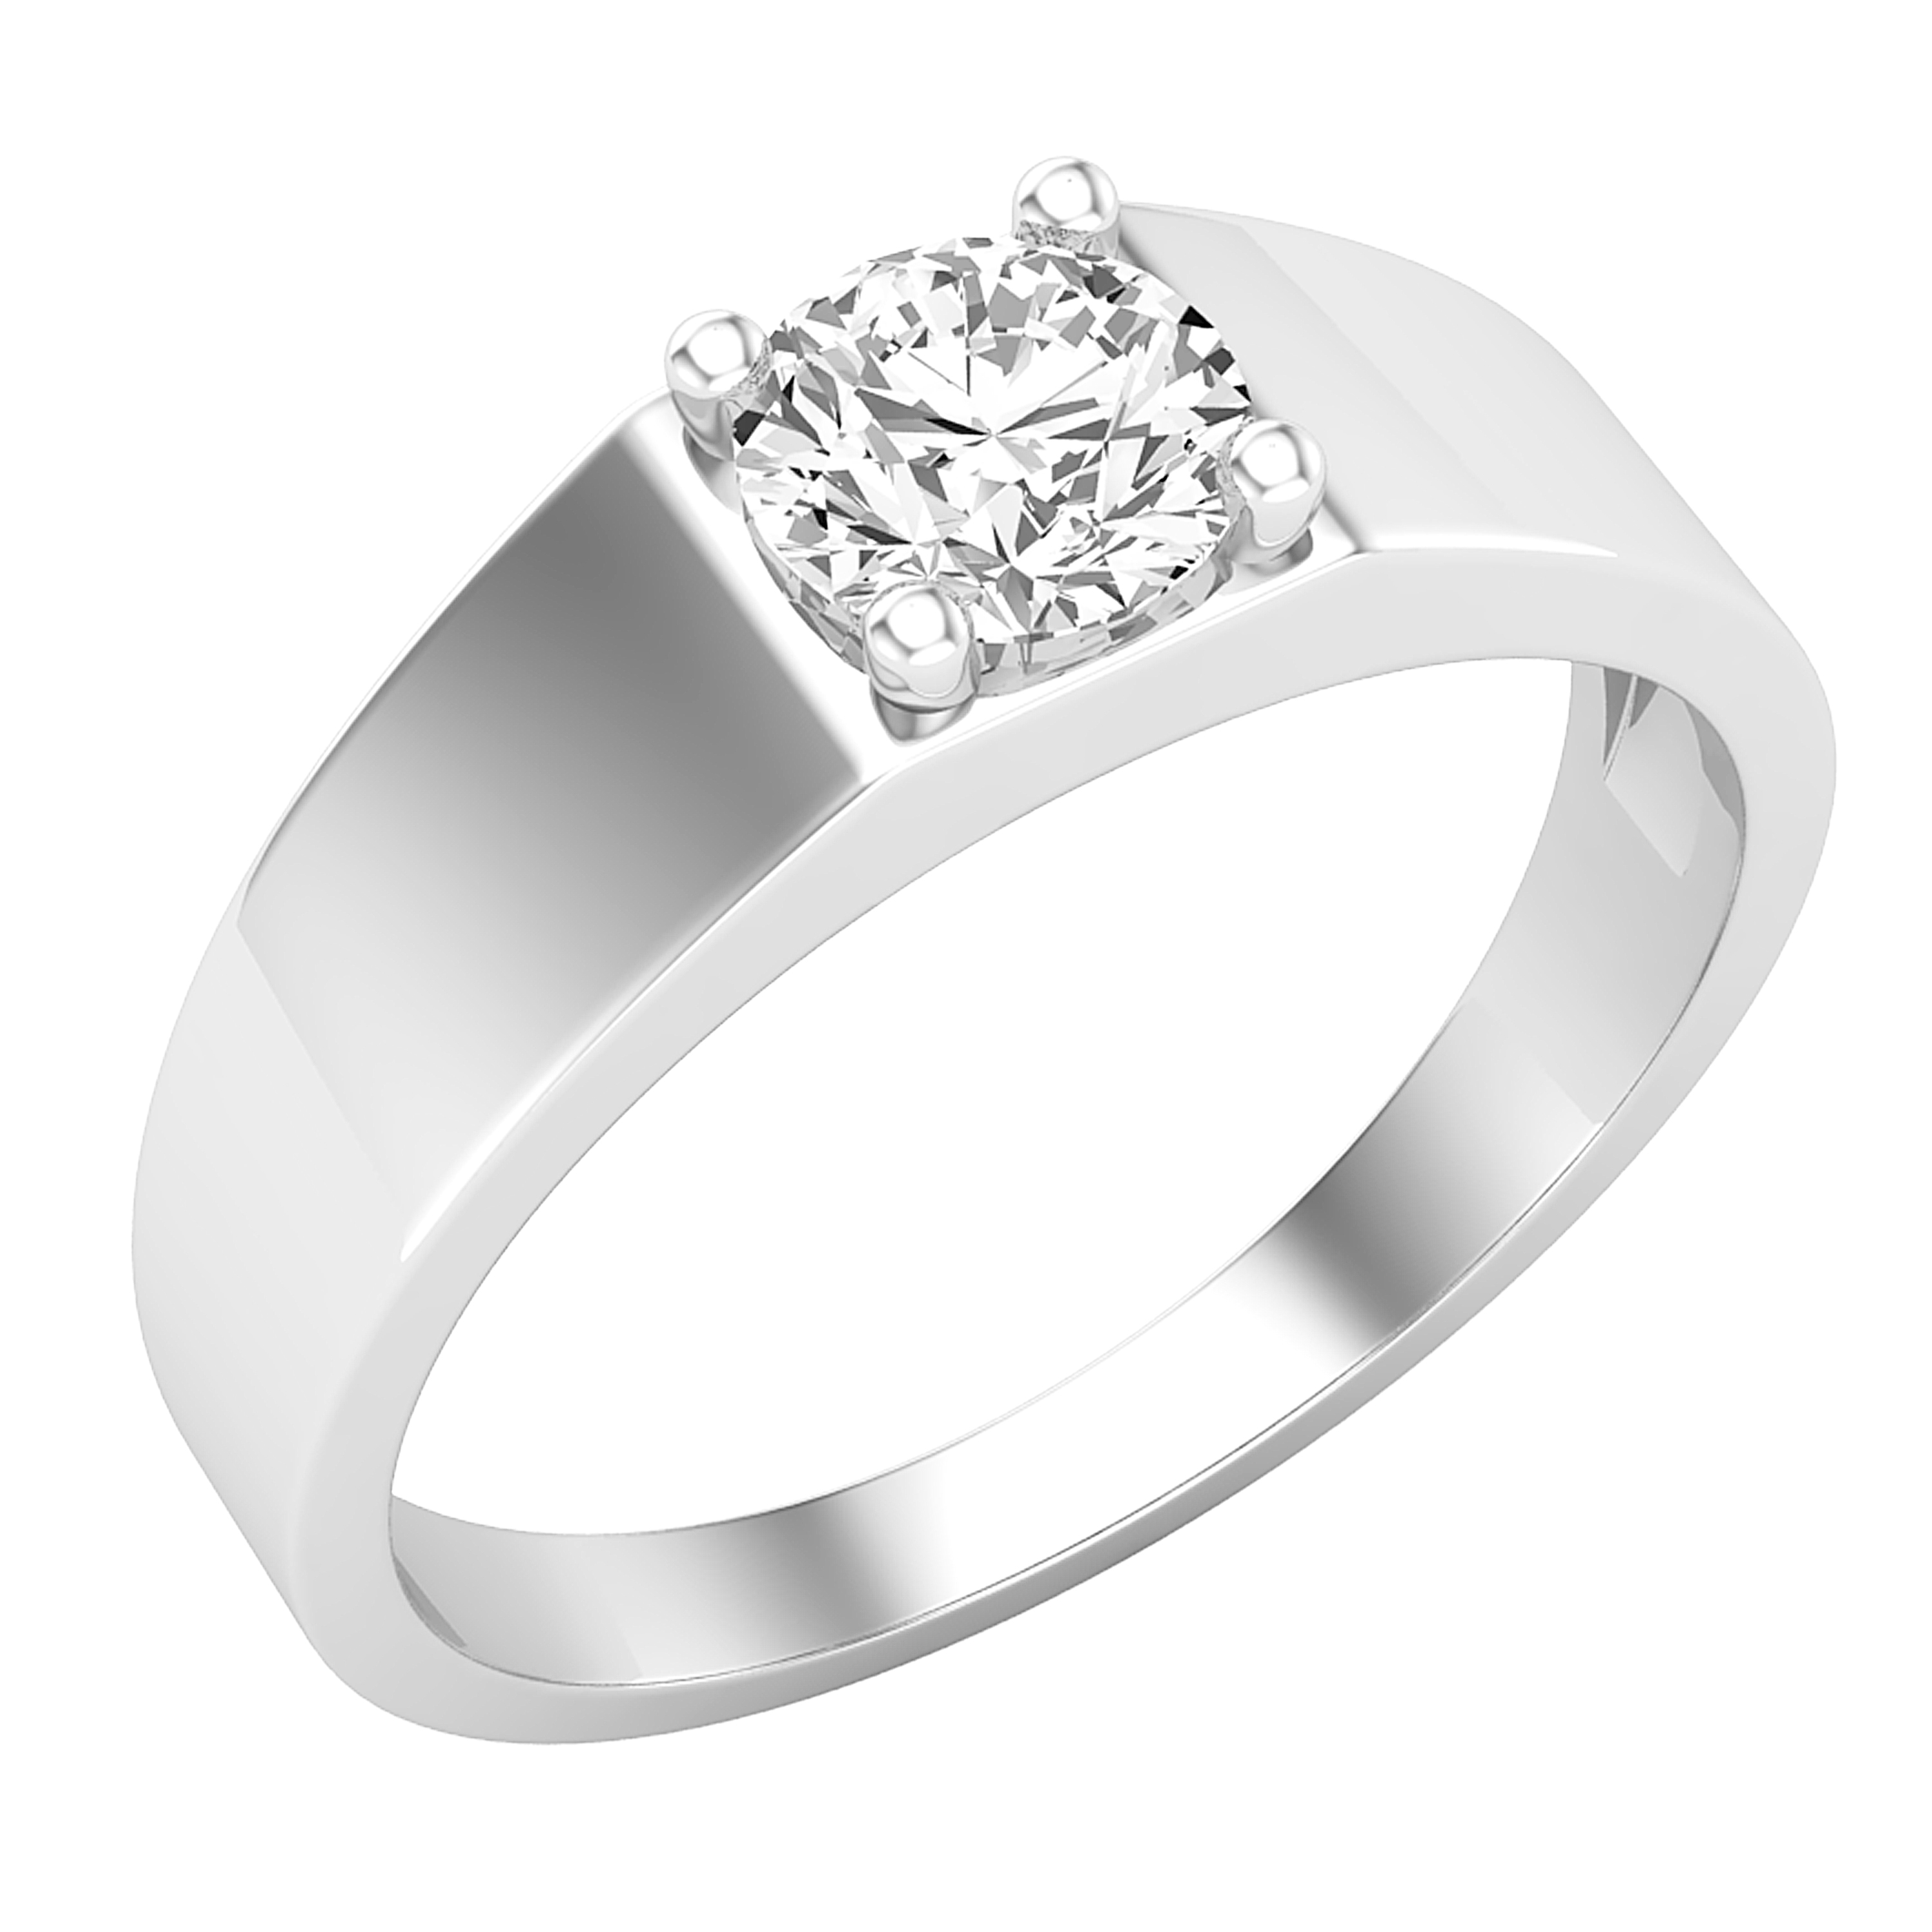 Diamond Wedding Ring For Men Solitaire Engagement Ring For Him